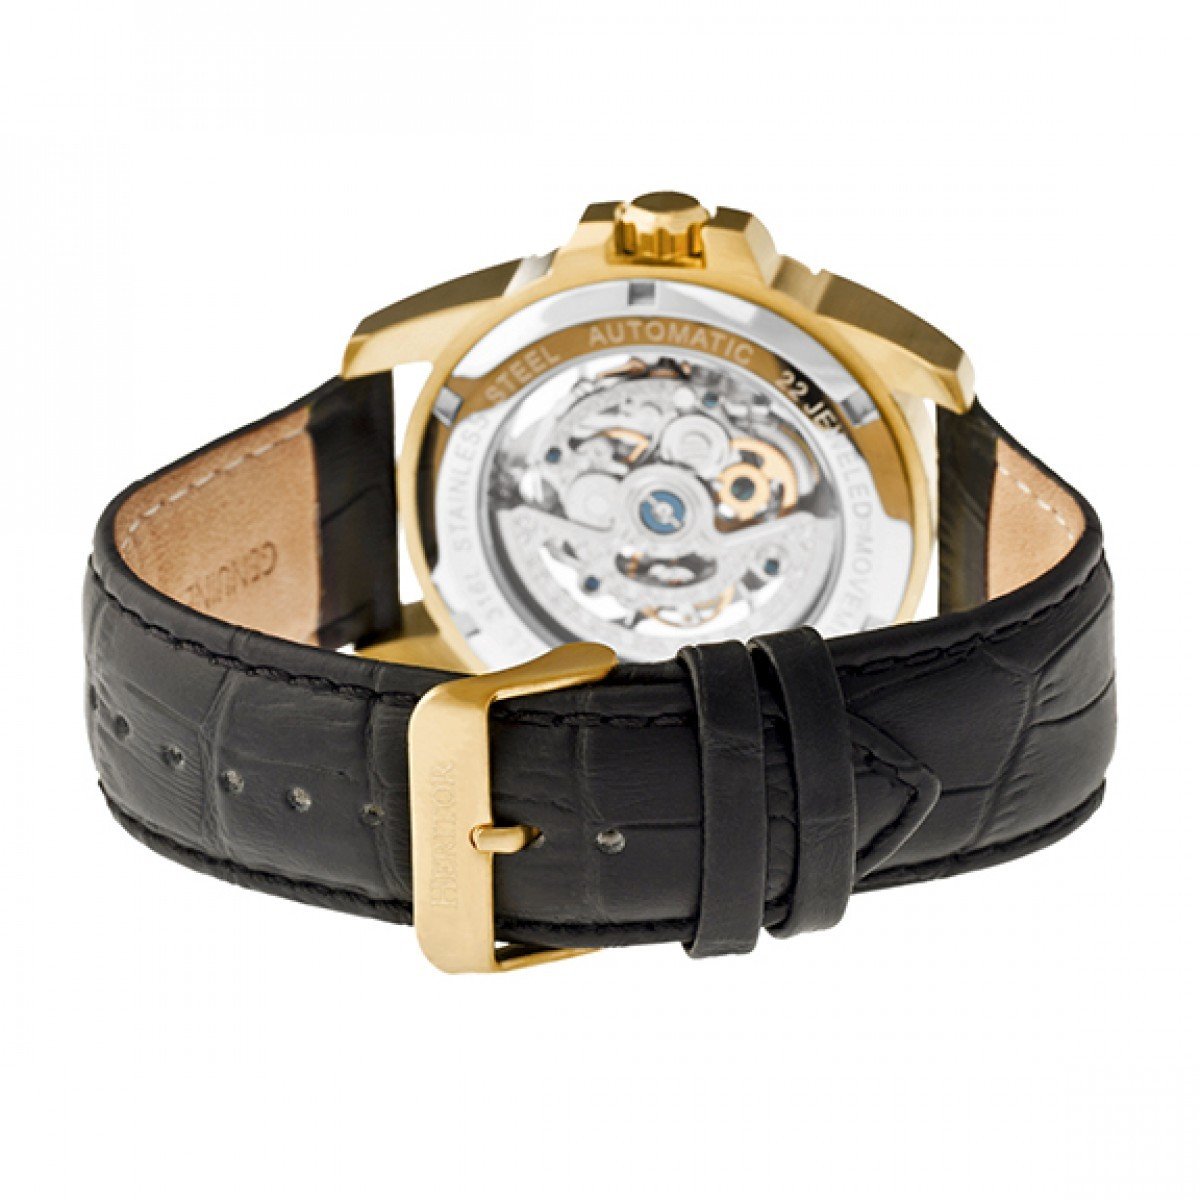 Heritor Automatic Armstrong Skeleton Leather-Band Watch - Gold/Black - HERHR3404